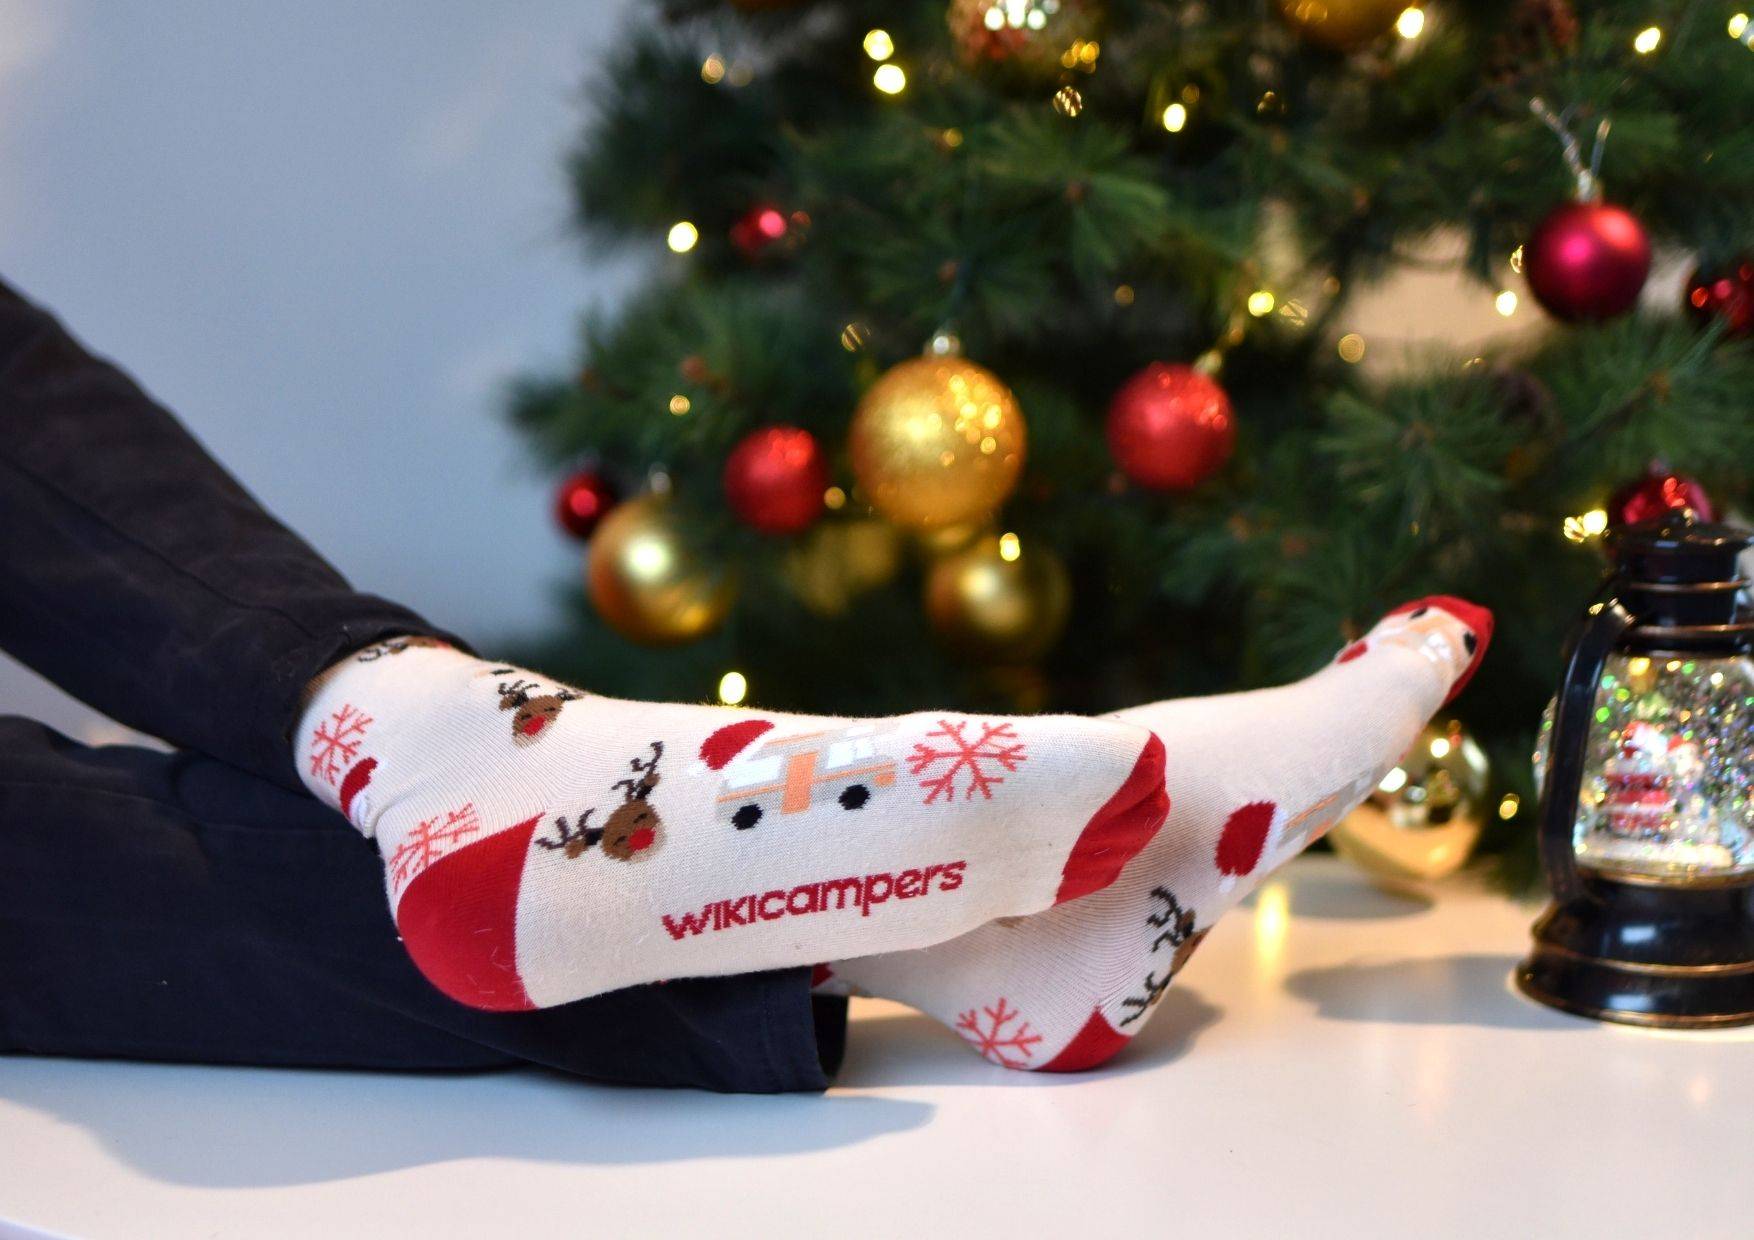 variant-chaussettes-wikicampers-noel